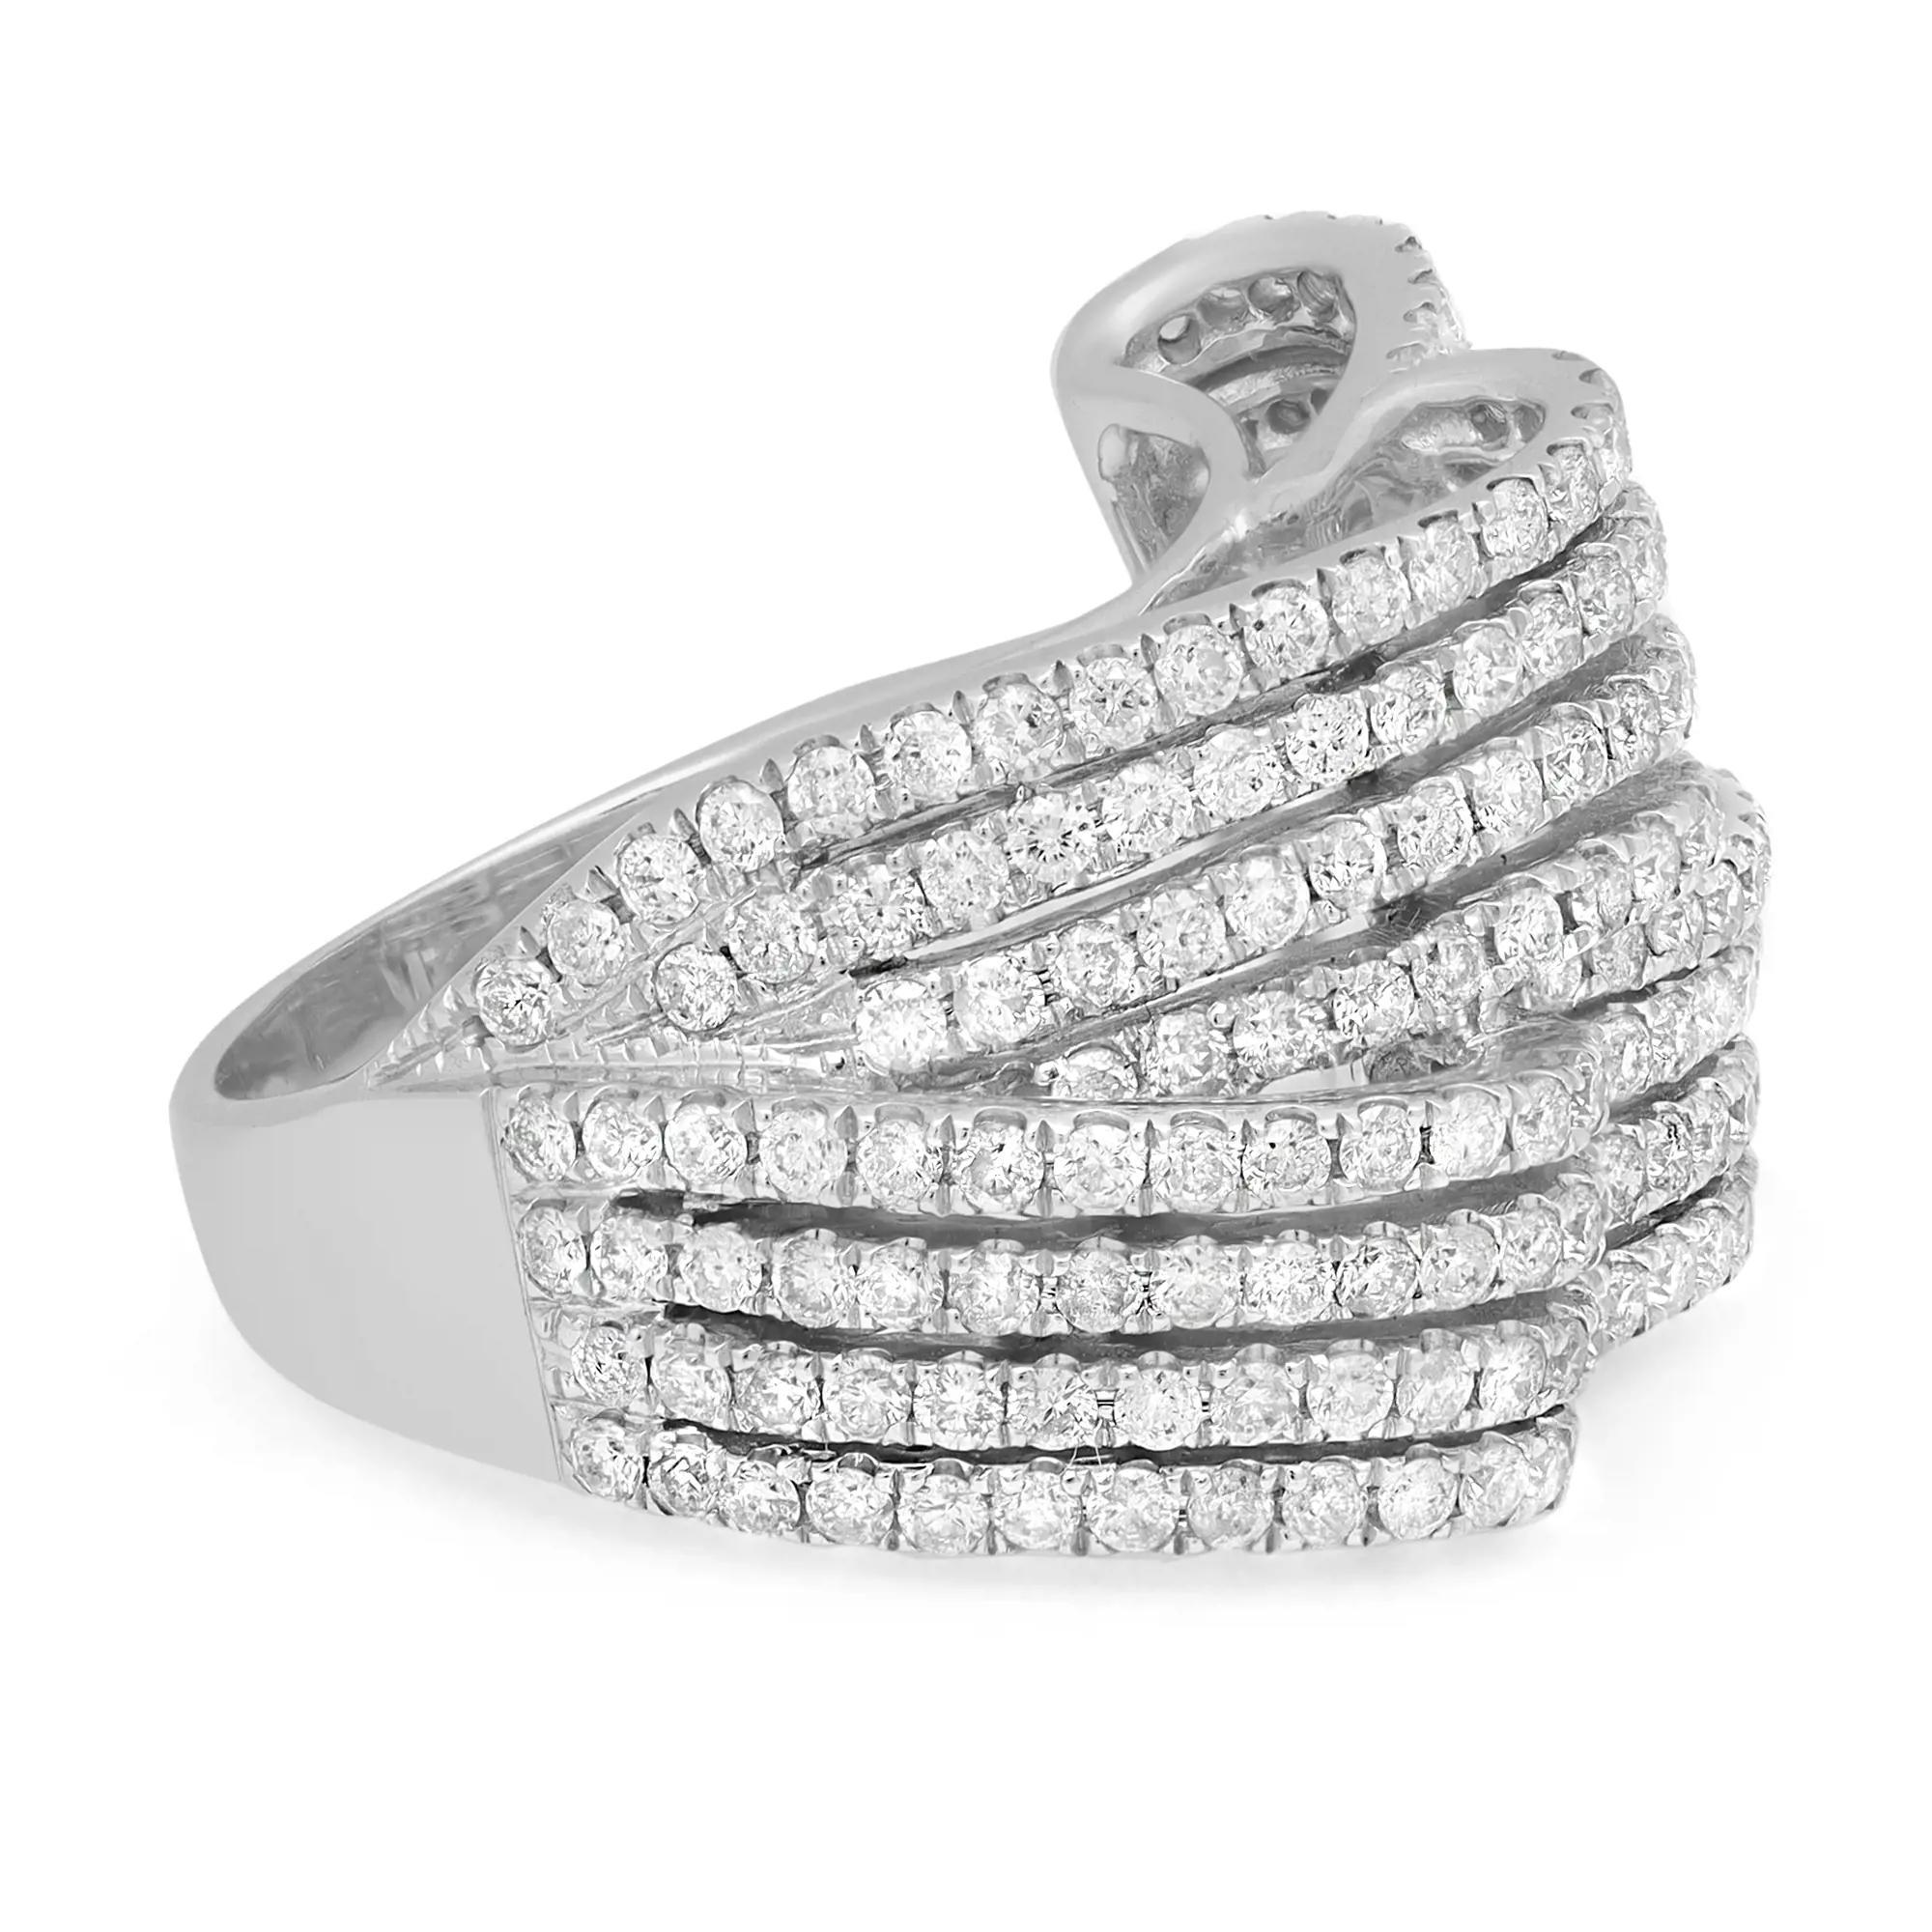 This beautiful diamond ladies cocktail ring exceptionally showcases prong set round cut diamonds in a unique waves shape shank. Crafted in fine 14k white gold. Total diamond weight: 2.24 carats. Diamond quality: color H-I and SI2-I clarity. Ring